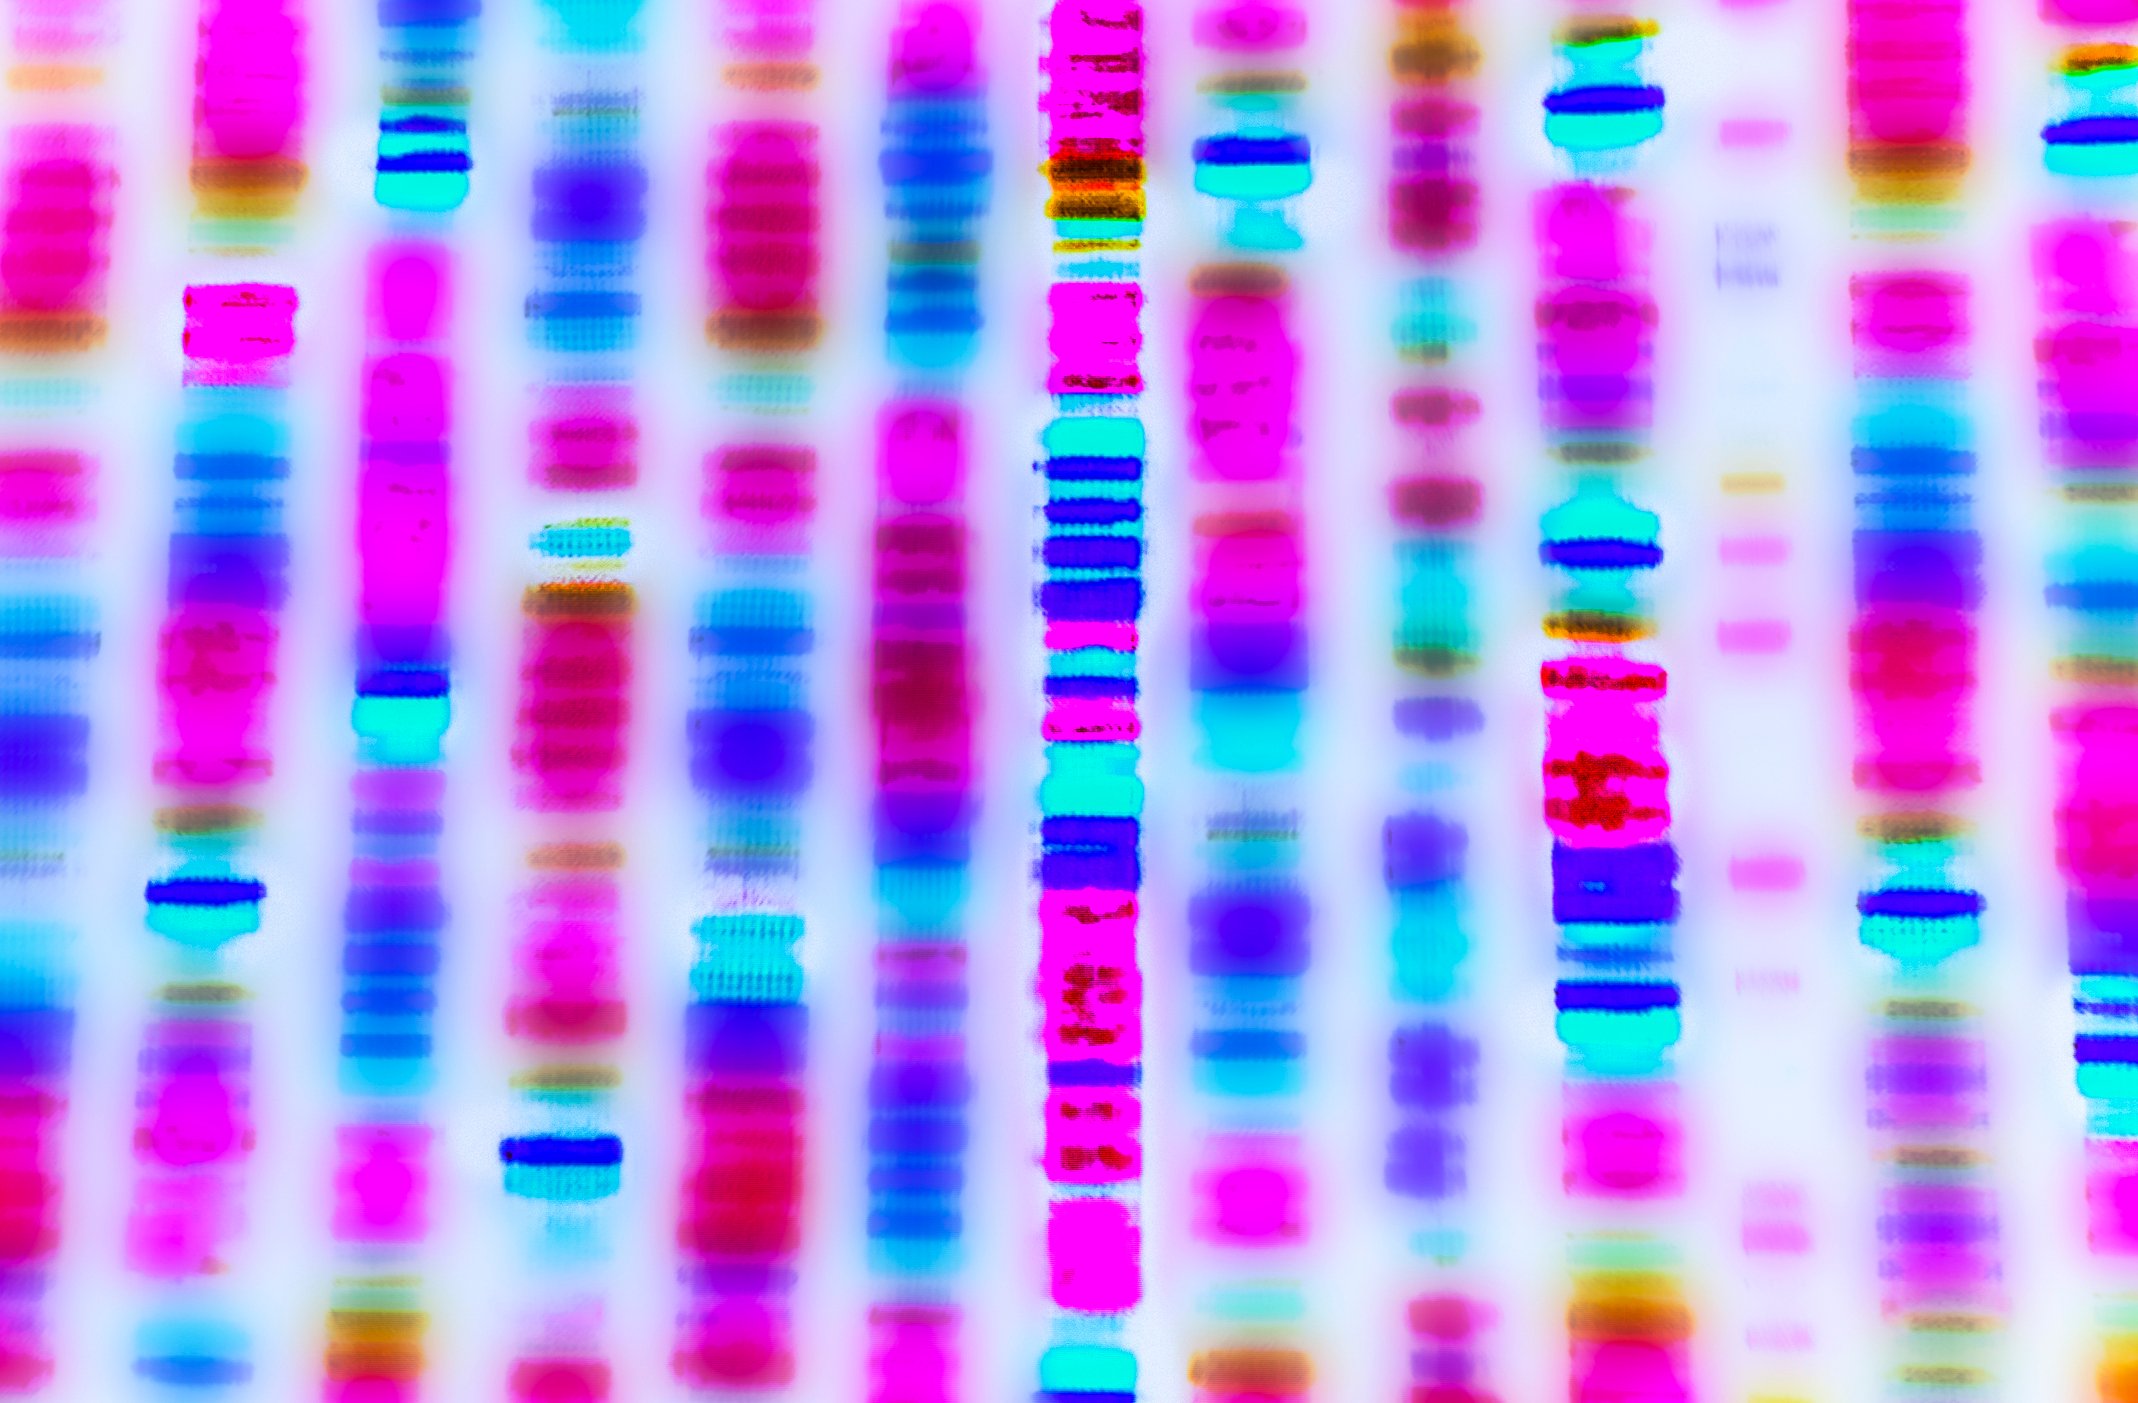 Flagship launches first UK biotech Quotient with genome sequencing platform